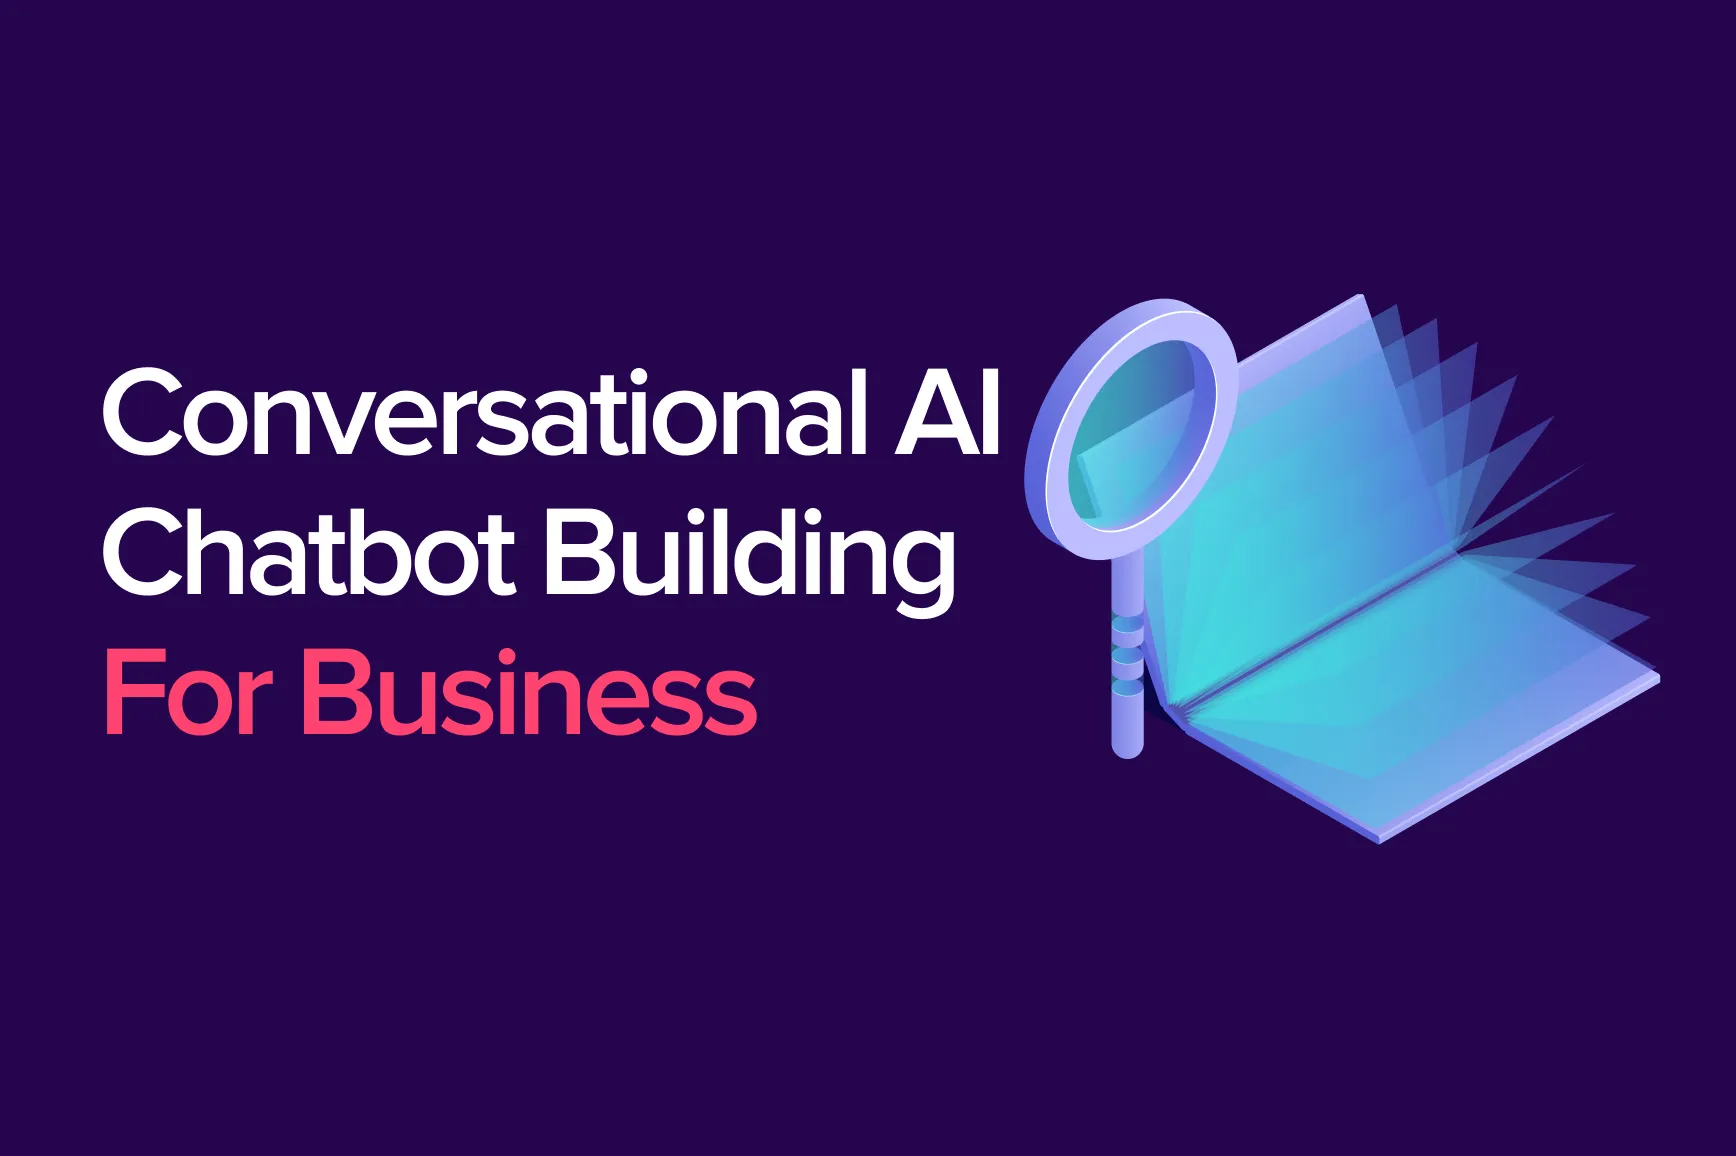 How to Get an AI Chatbot for Your Business?